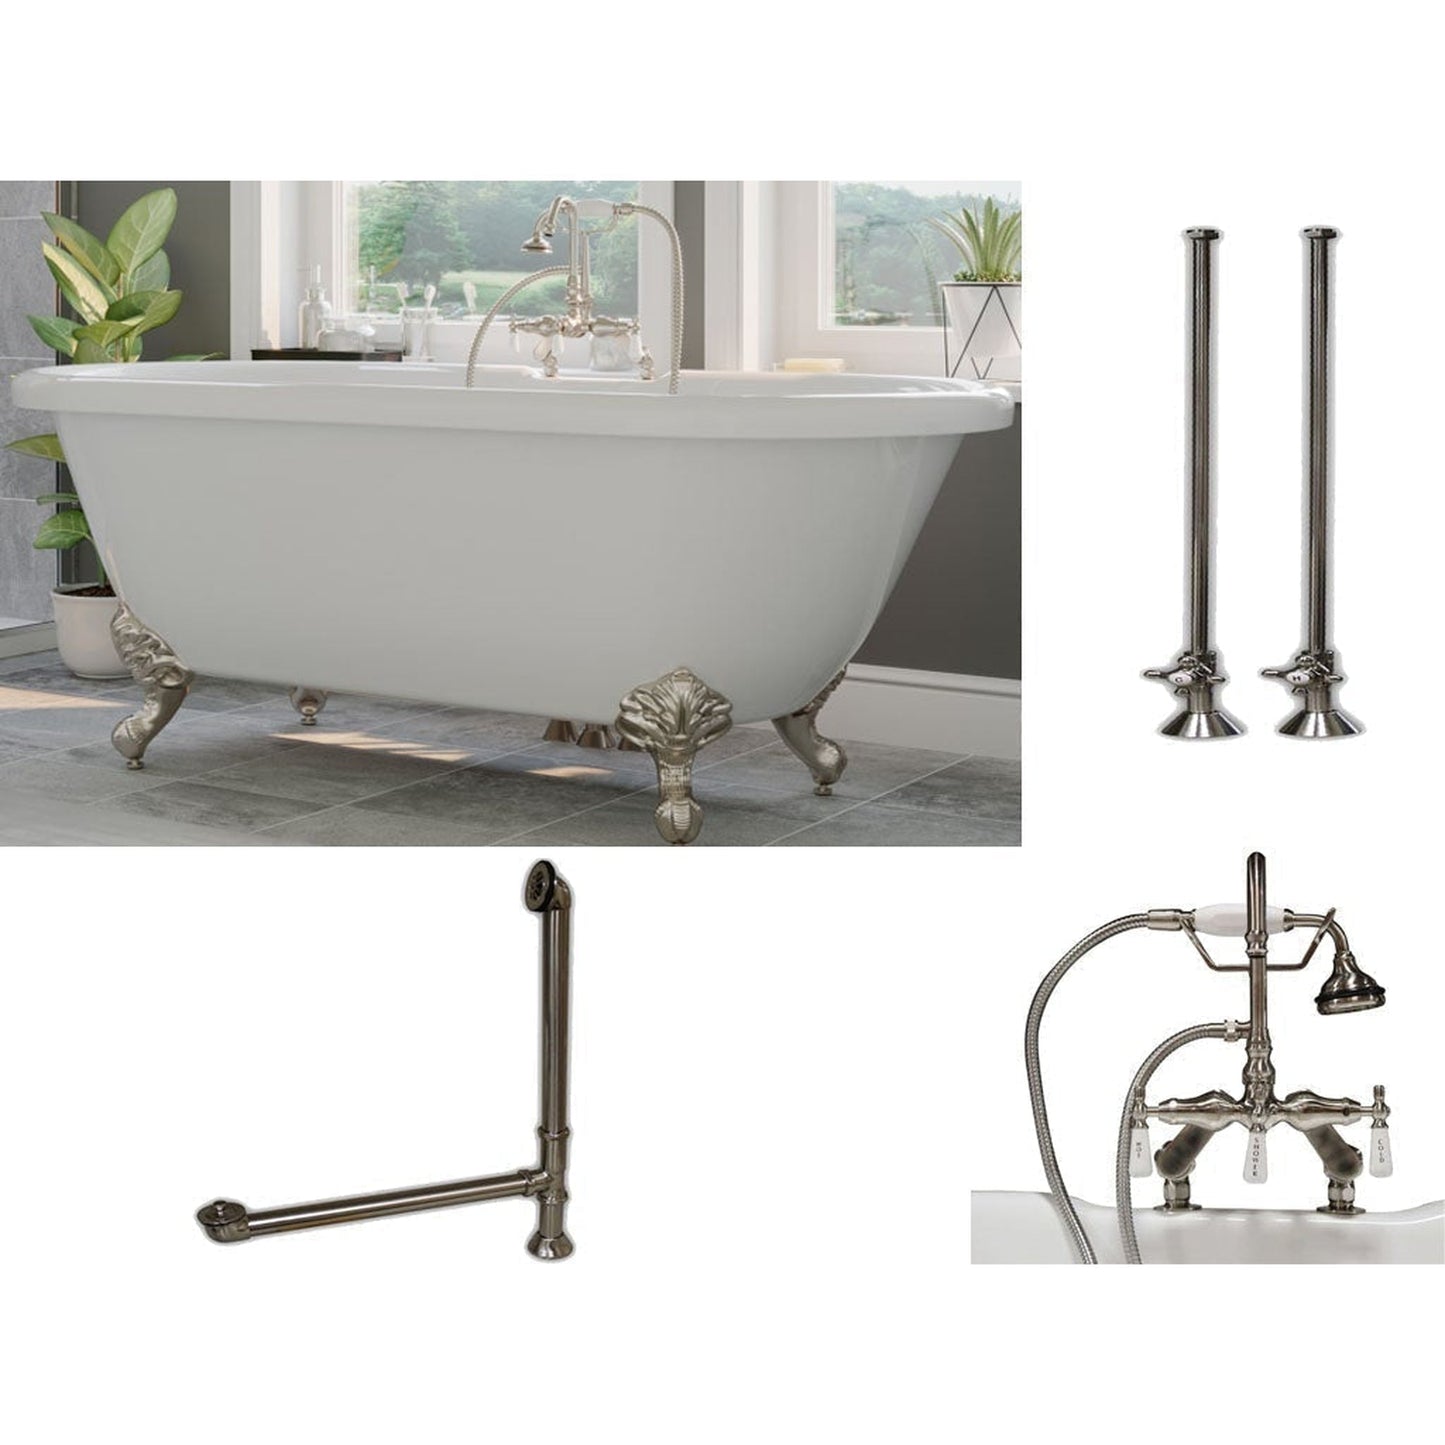 Cambridge Plumbing 70" White Acrylic Double Ended Clawfoot Bathtub With Deck Holes And Complete Plumbing Package Including Porcelain Lever English Telephone Brass Faucet, Supply Lines, Drain And Overflow Assembly In Brushed Nickel